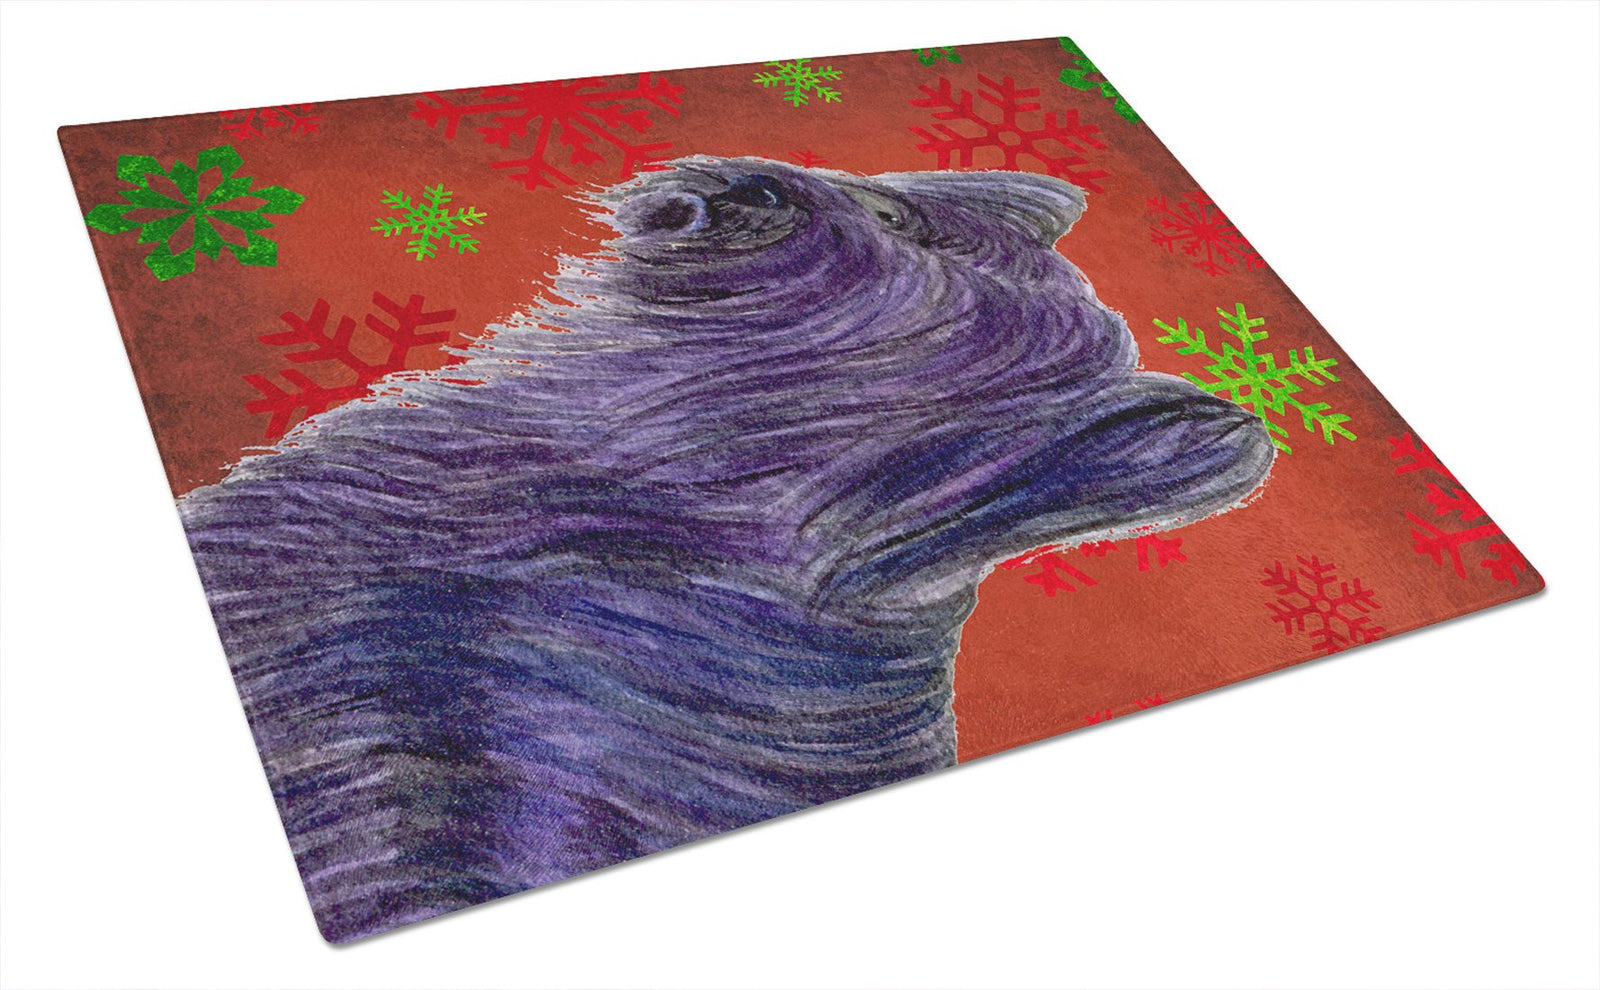 Skye Terrier Red and Green Snowflakes  Christmas Glass Cutting Board Large by Caroline's Treasures